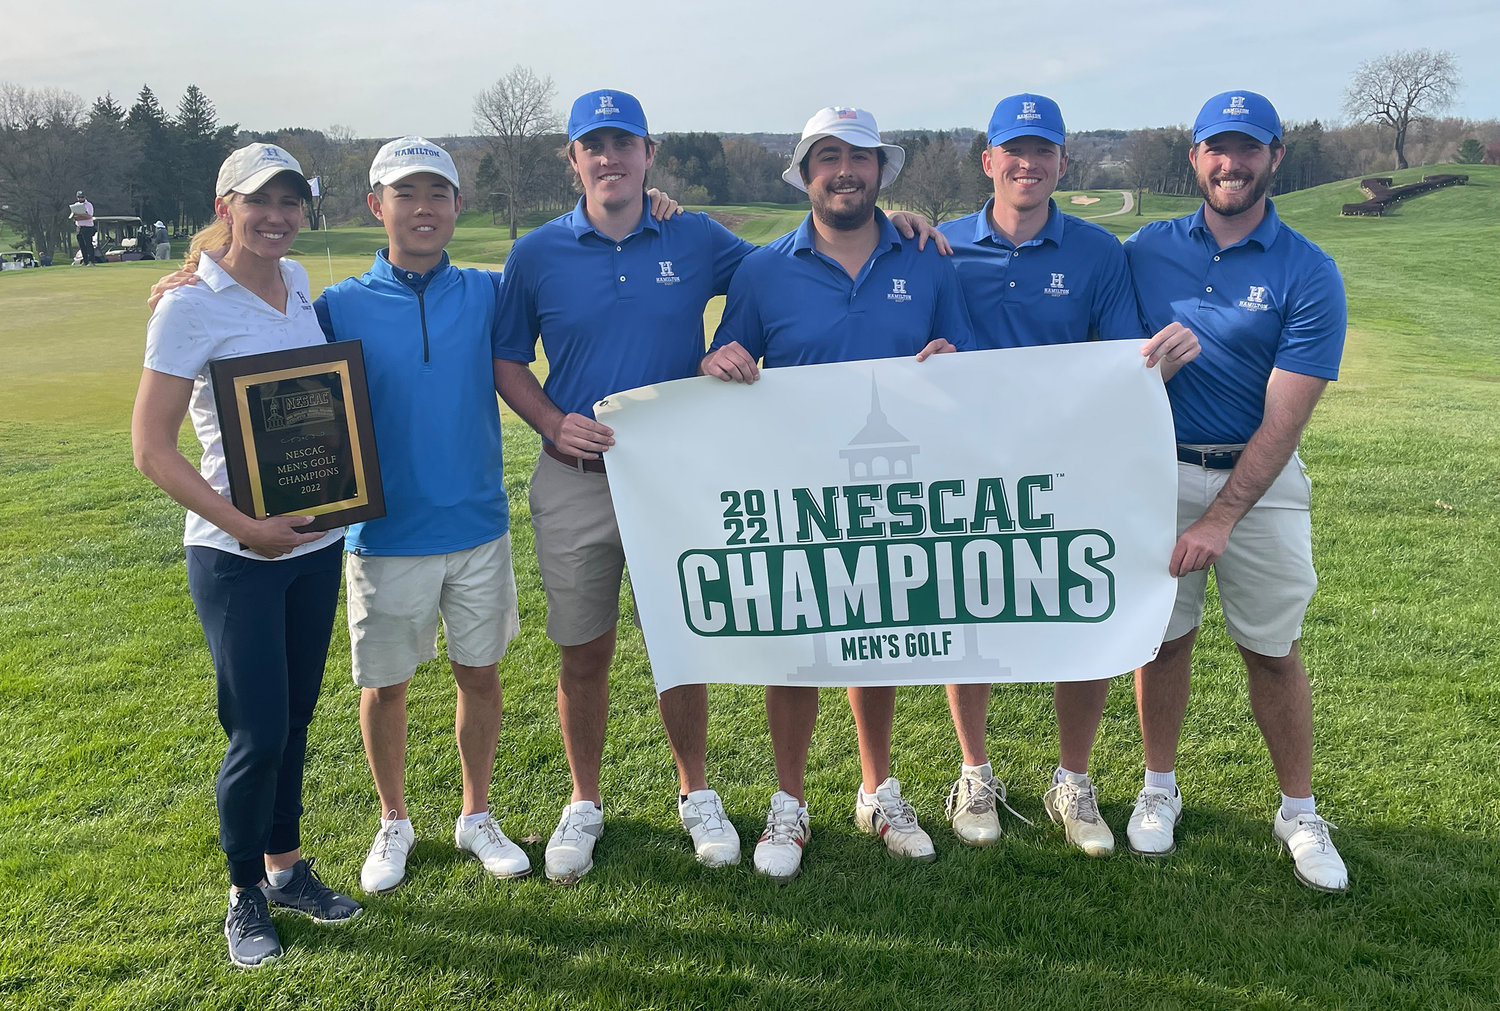 The Hamilton College men’s golf team displays the banner for the 2022 NESCAC championship the team won this past weekend, April 30 and May 1, at Yahnundasis Golf Club in New Hartford. The team is coached by Lauren Cupp, of Rome, at left.